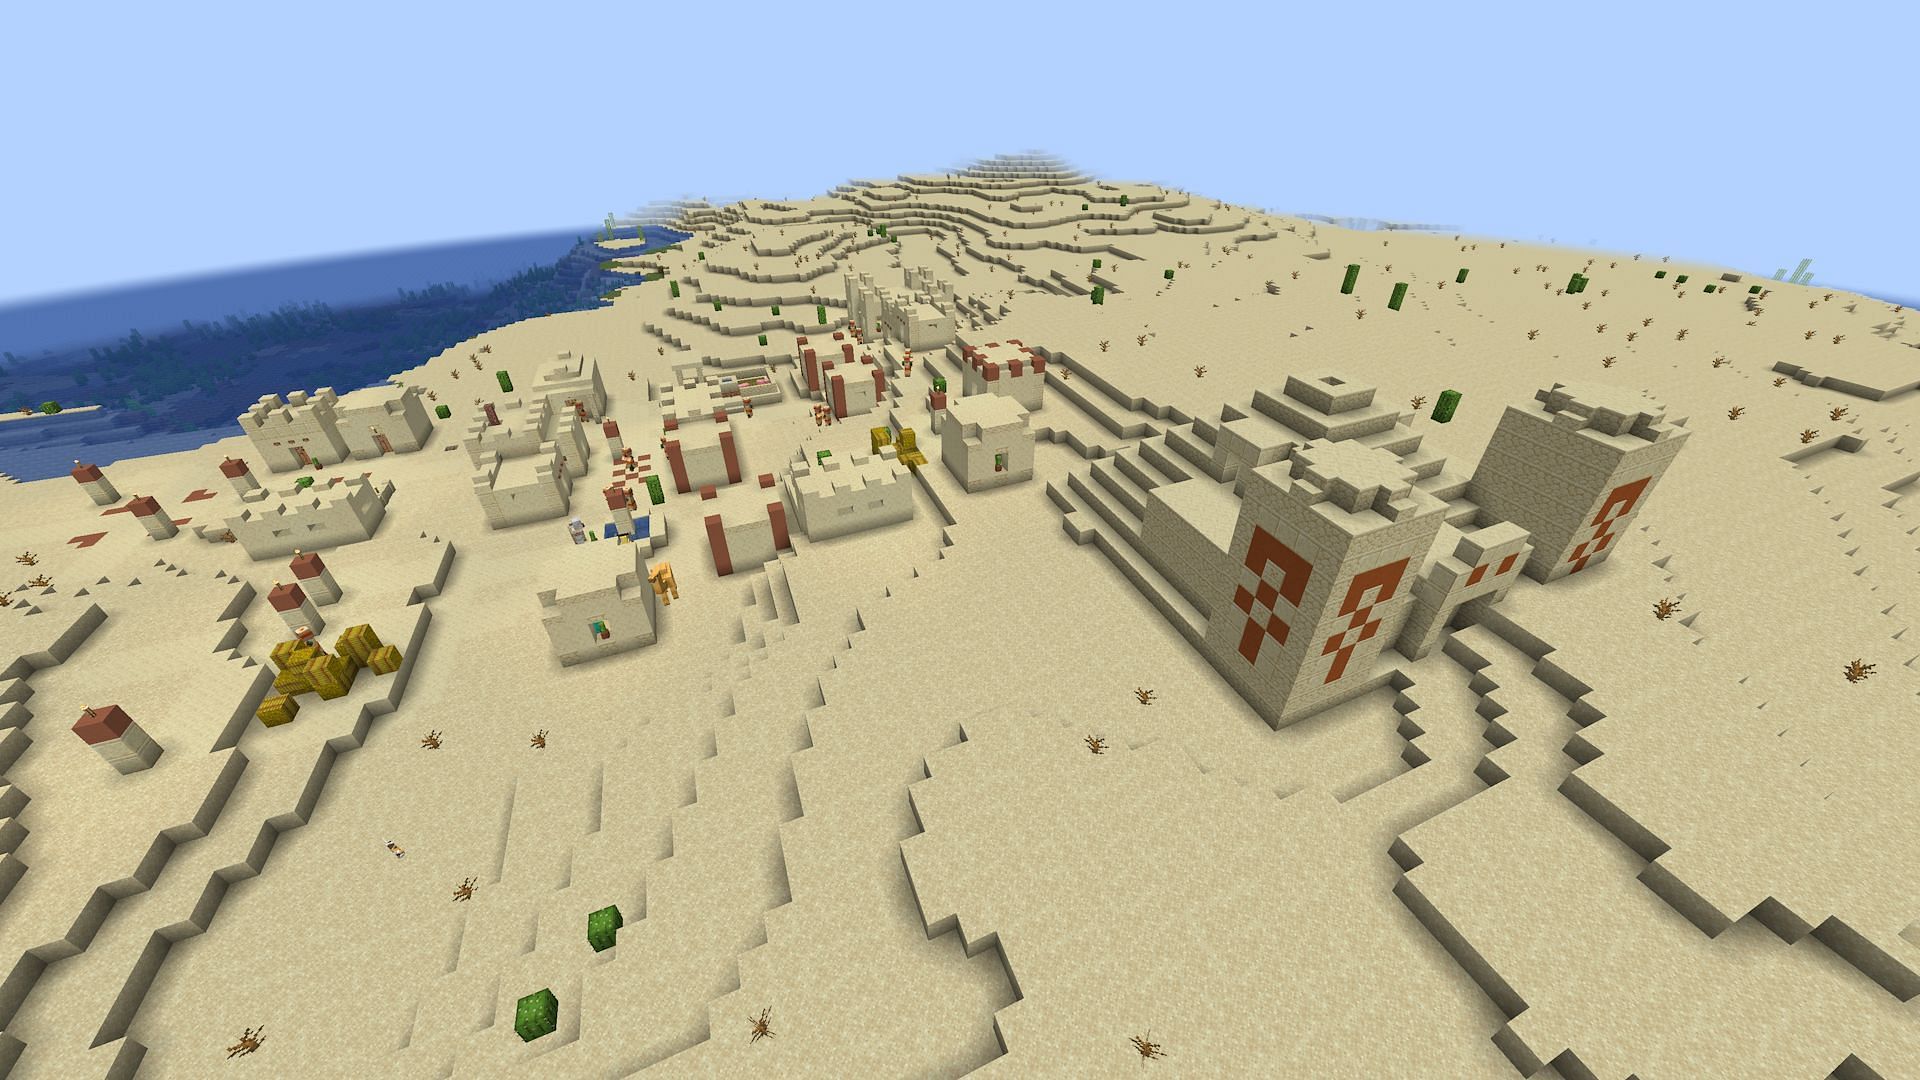 Desert temples and villages make these sandy expanses hospitable (Image via Mojang)